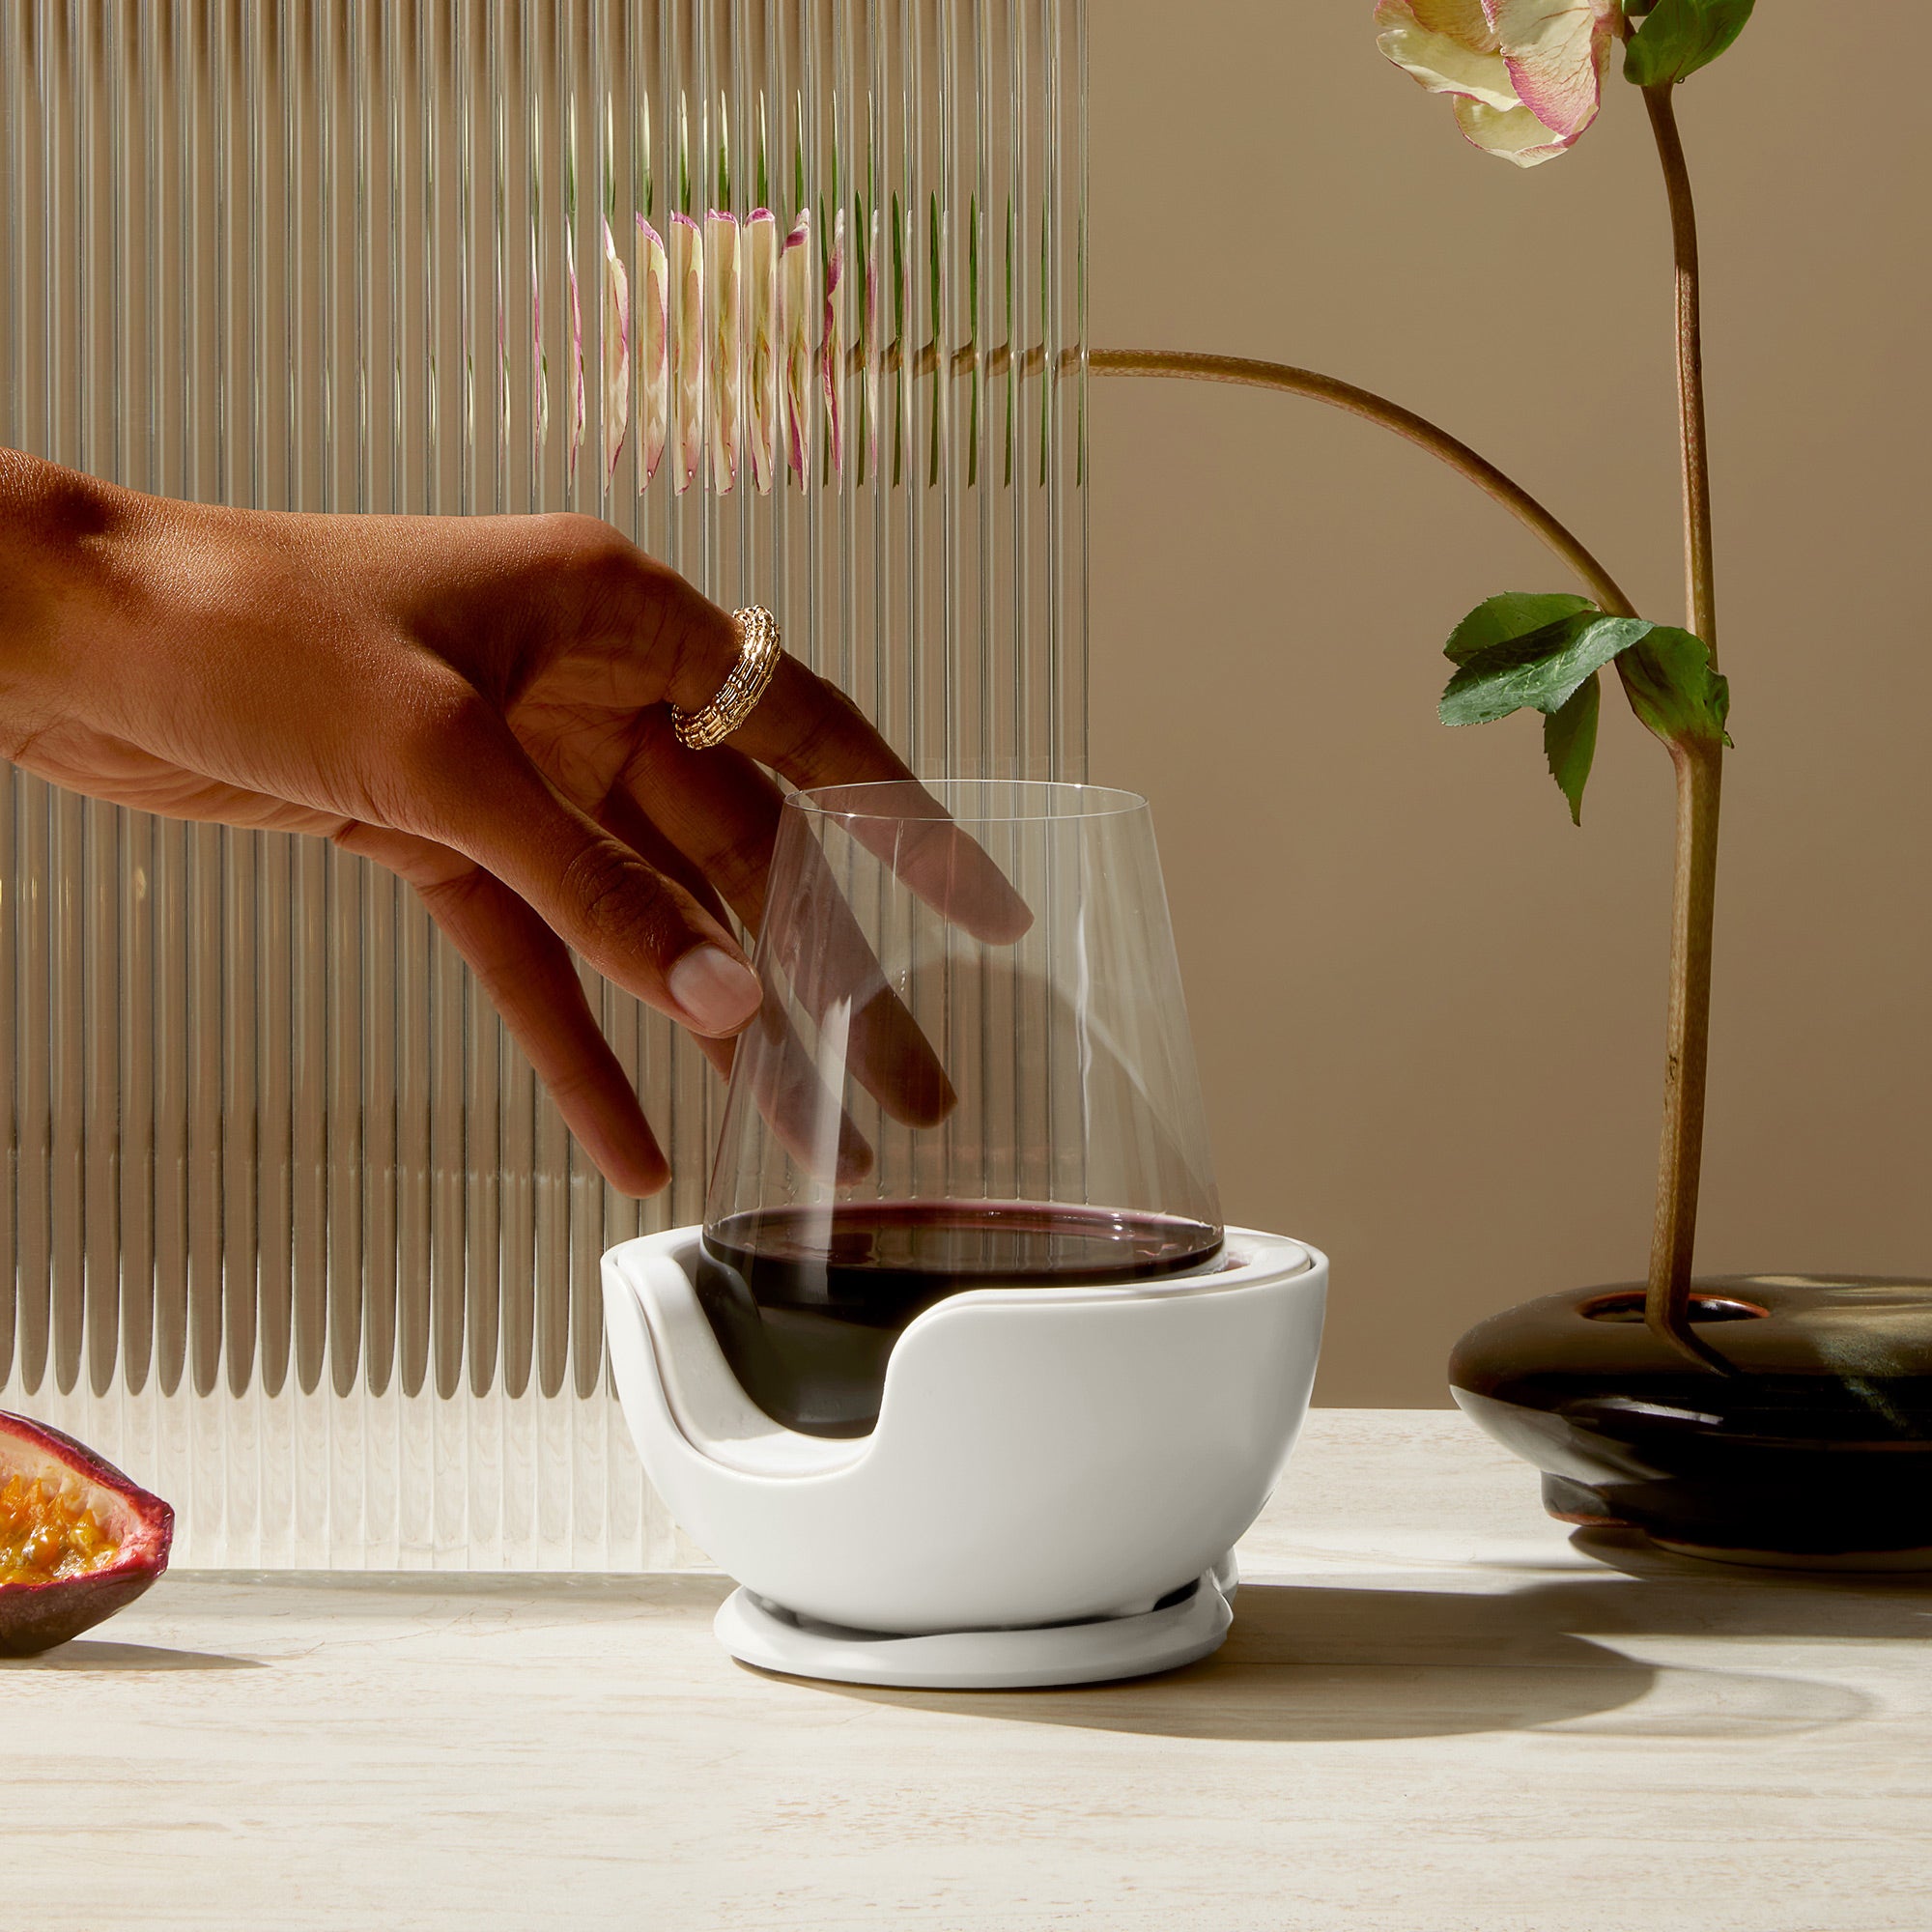  Vochill stemless wine chillers keep your wine cold for up to three hours